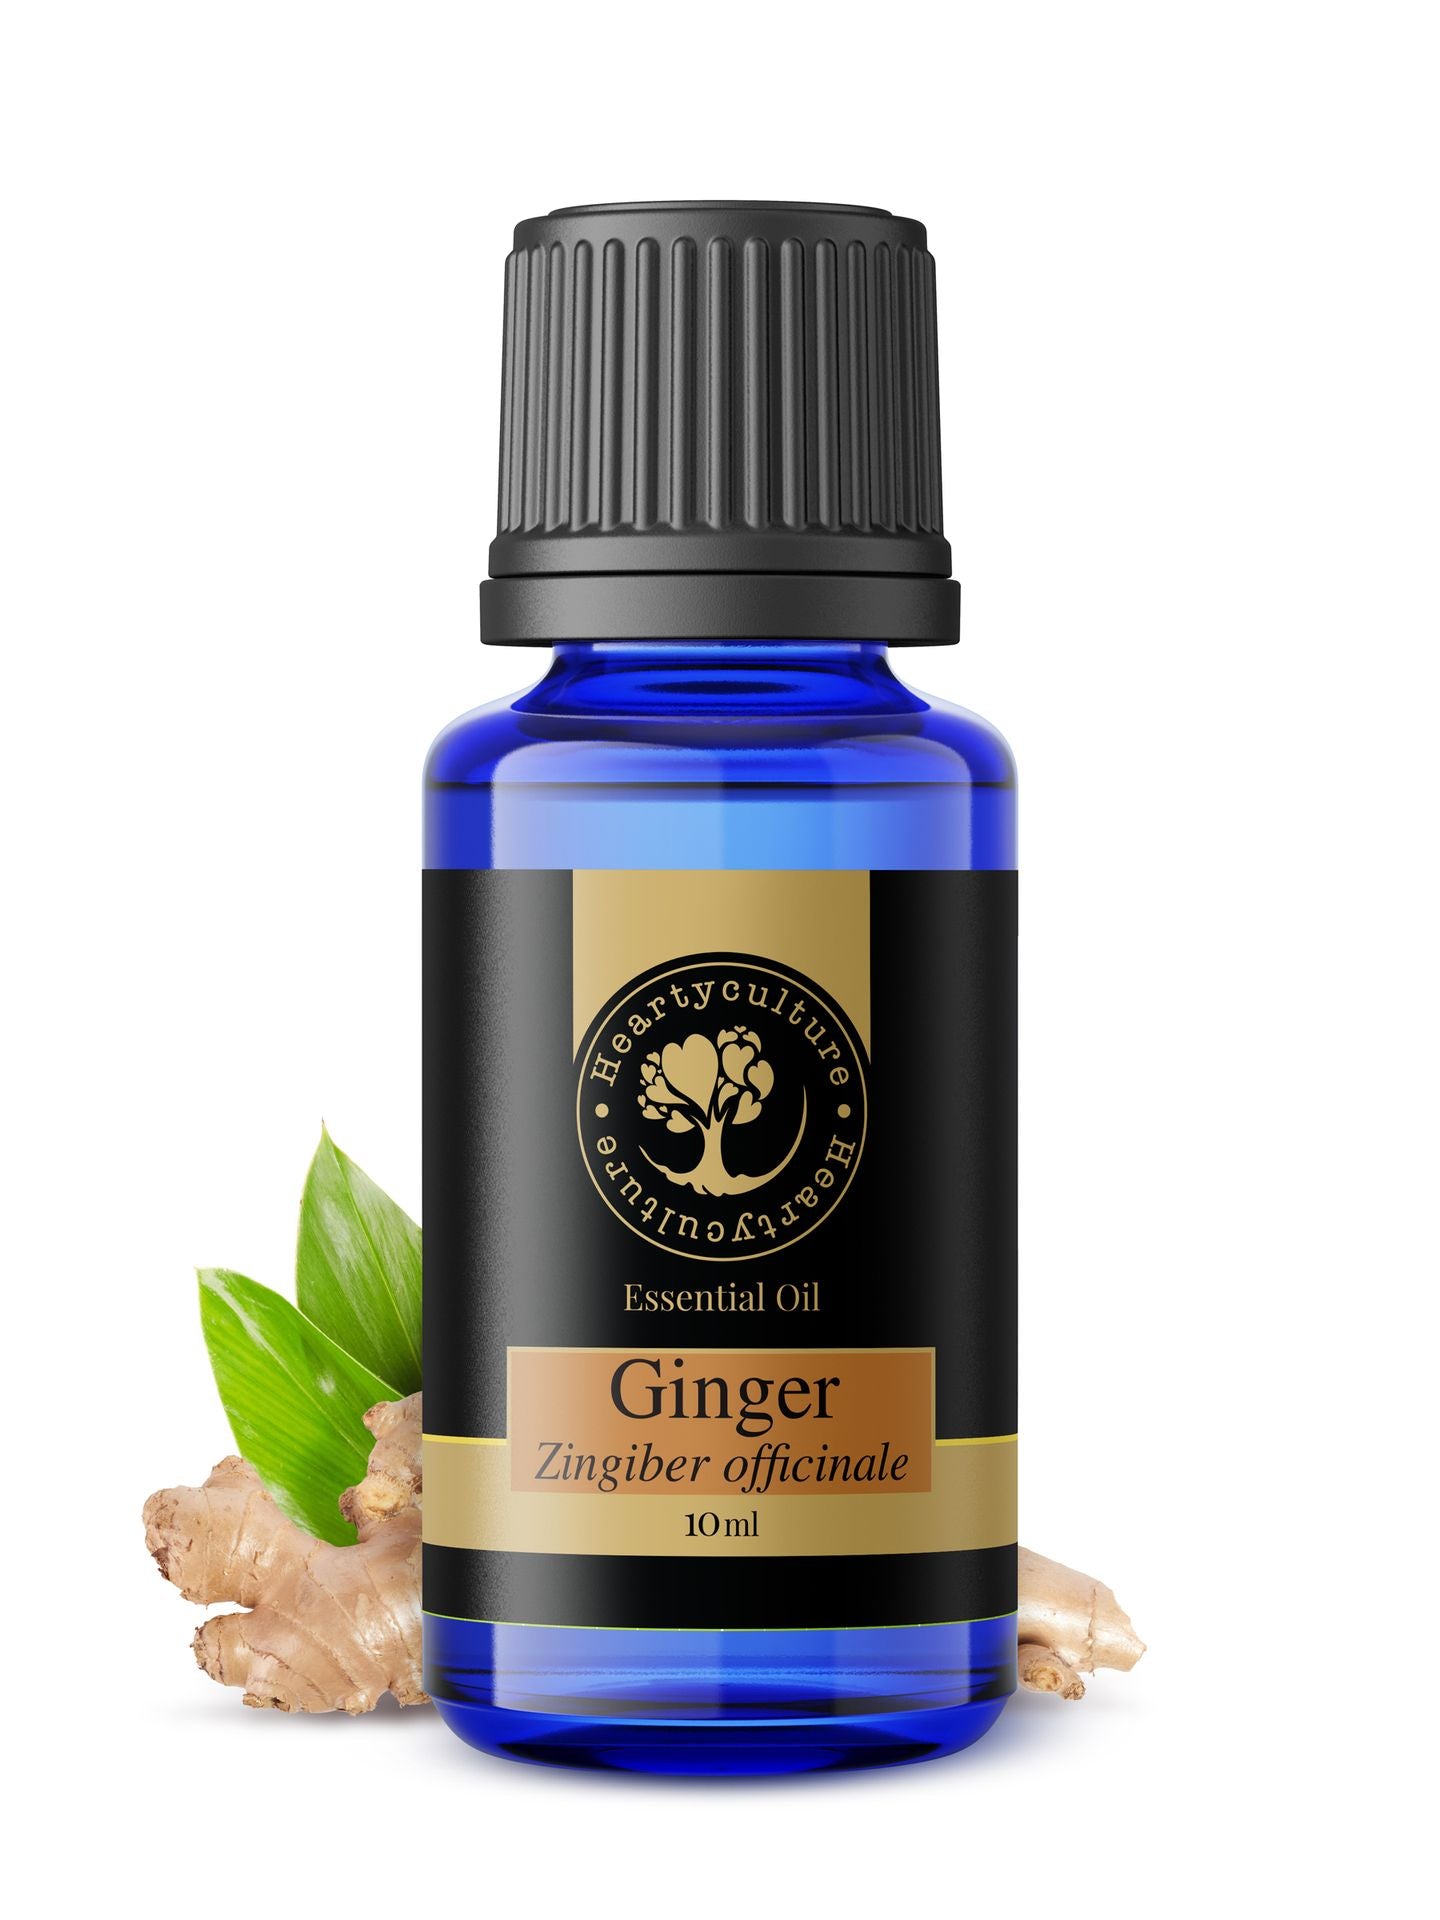 Heartyculture Ginger Essential Oil - 10 ml - hfnl!fe